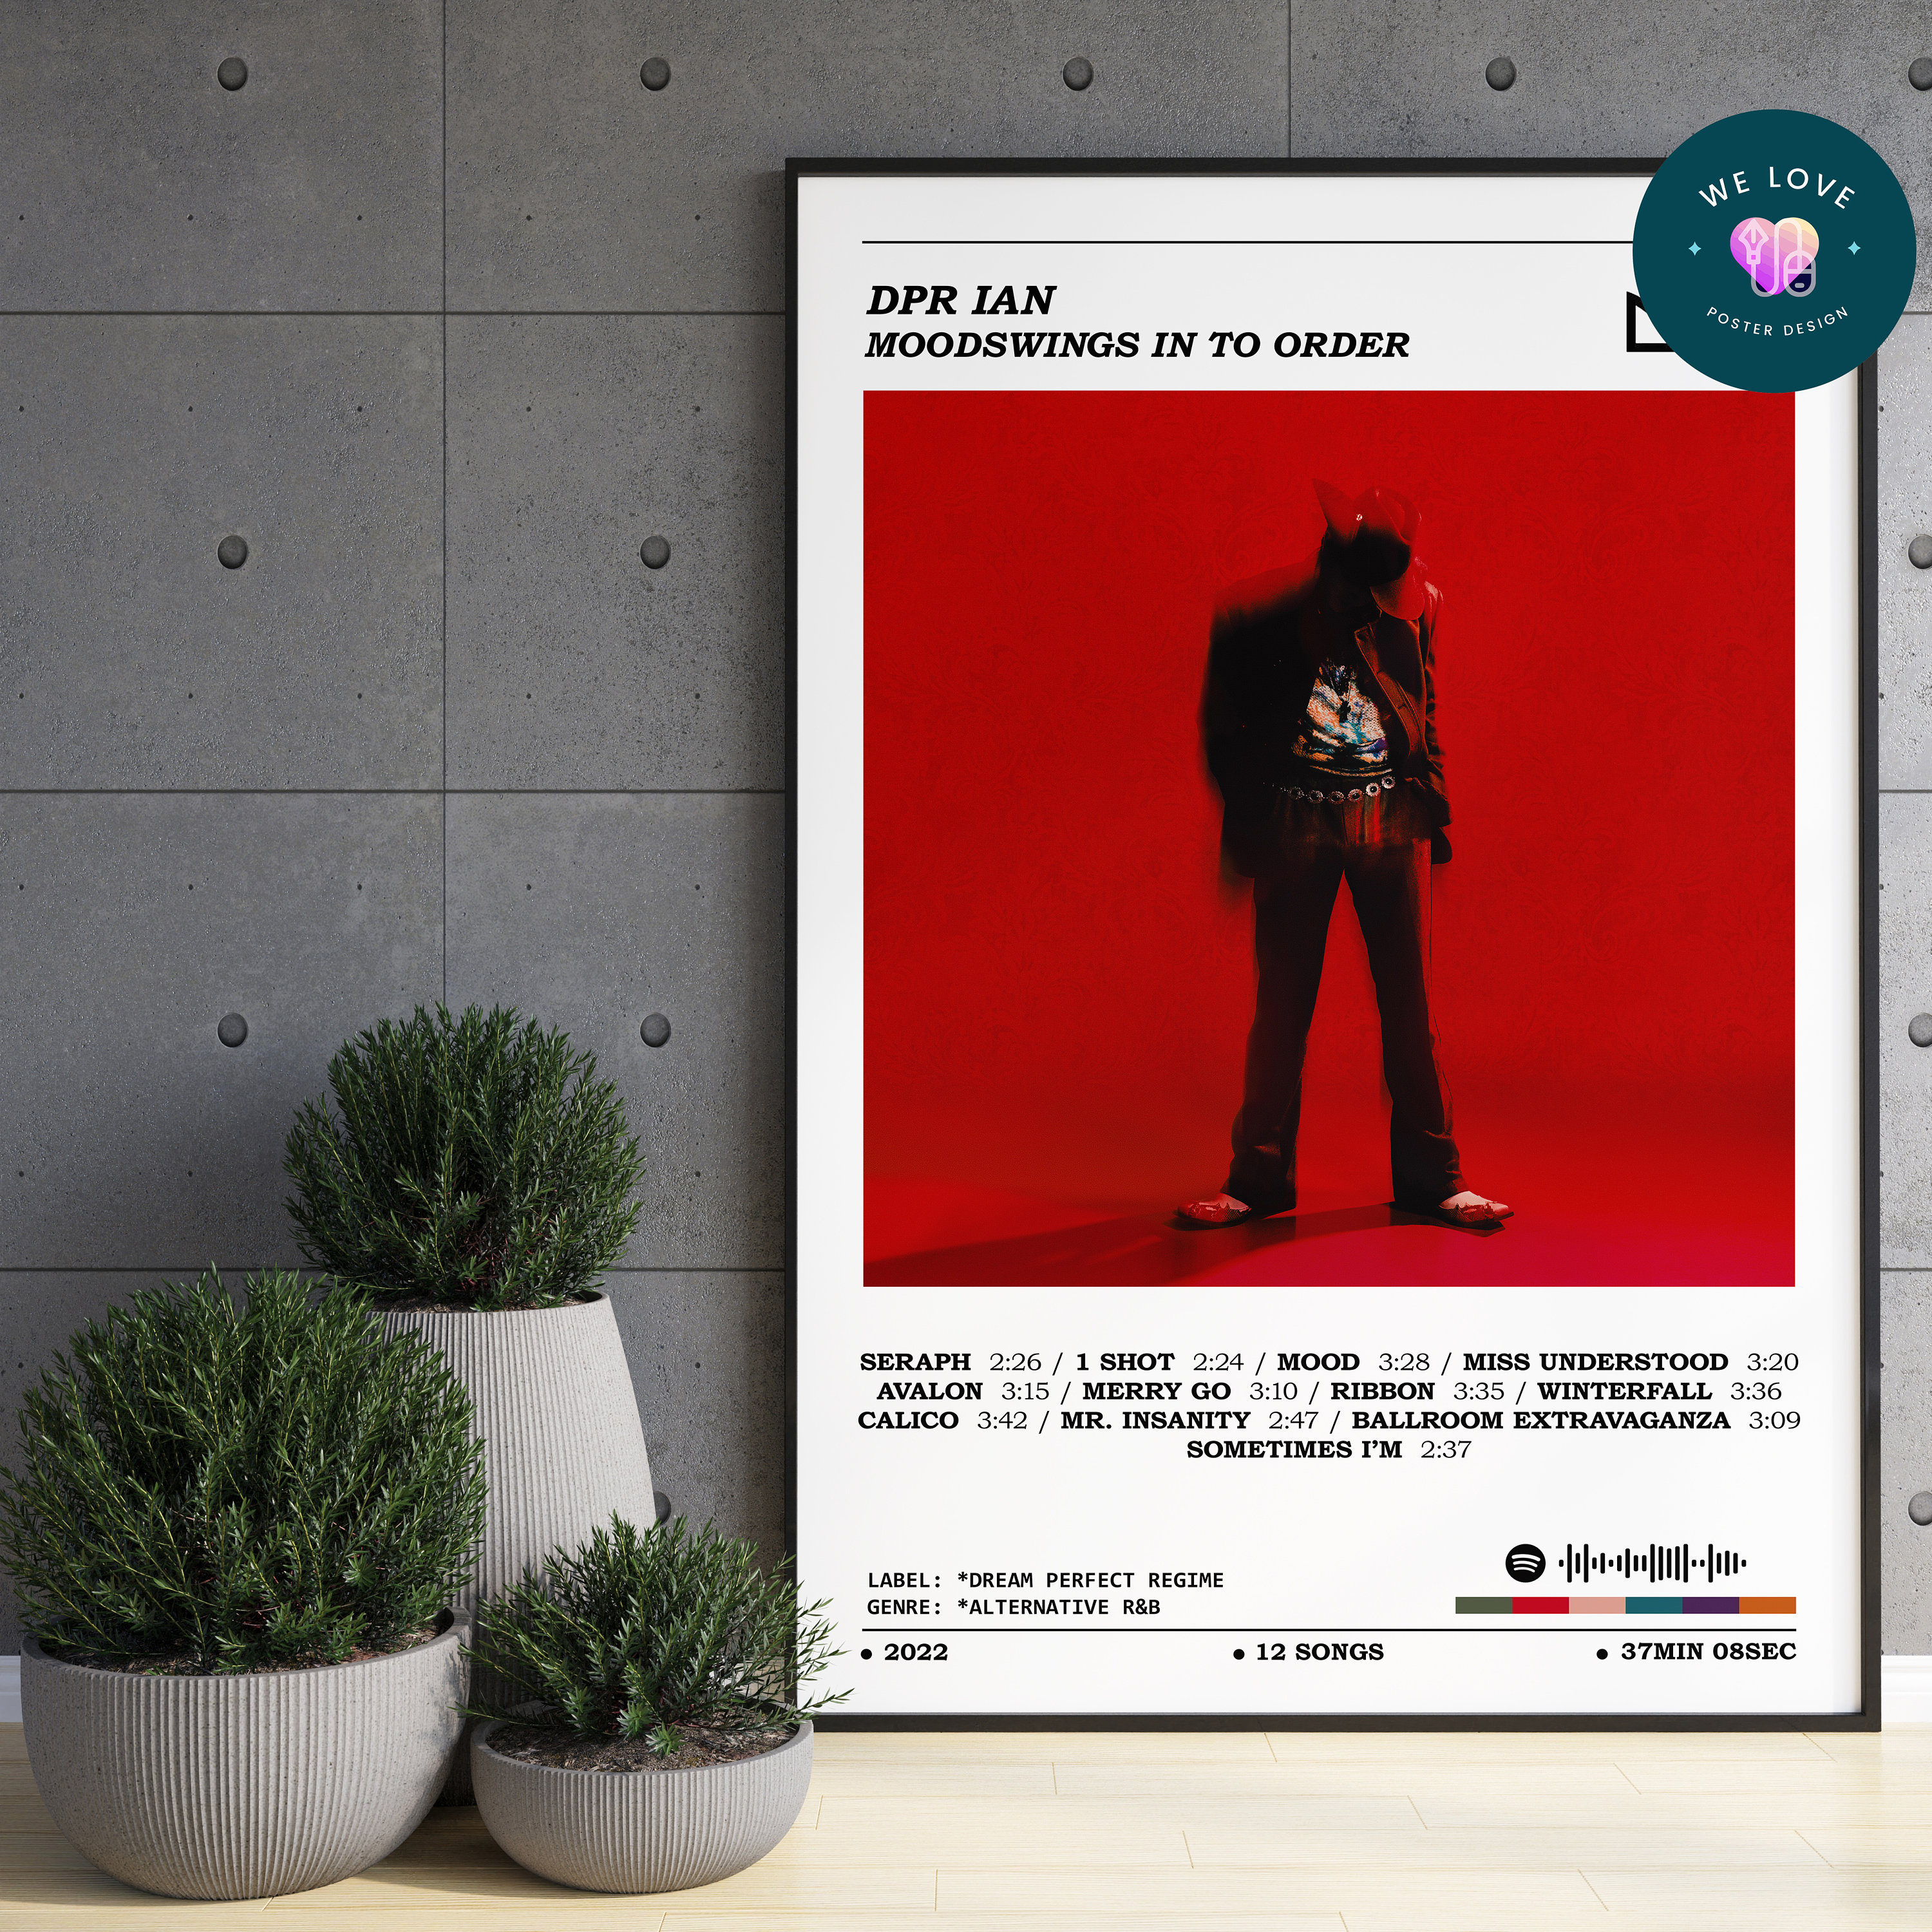  DPR IAN - Moodswings In This Order Music Cover Poster Canvas  Poster Wall Art Decor Print Picture Paintings for Living Room Bedroom  Decoration Unframe-style12x18inch(30x45cm): Posters & Prints